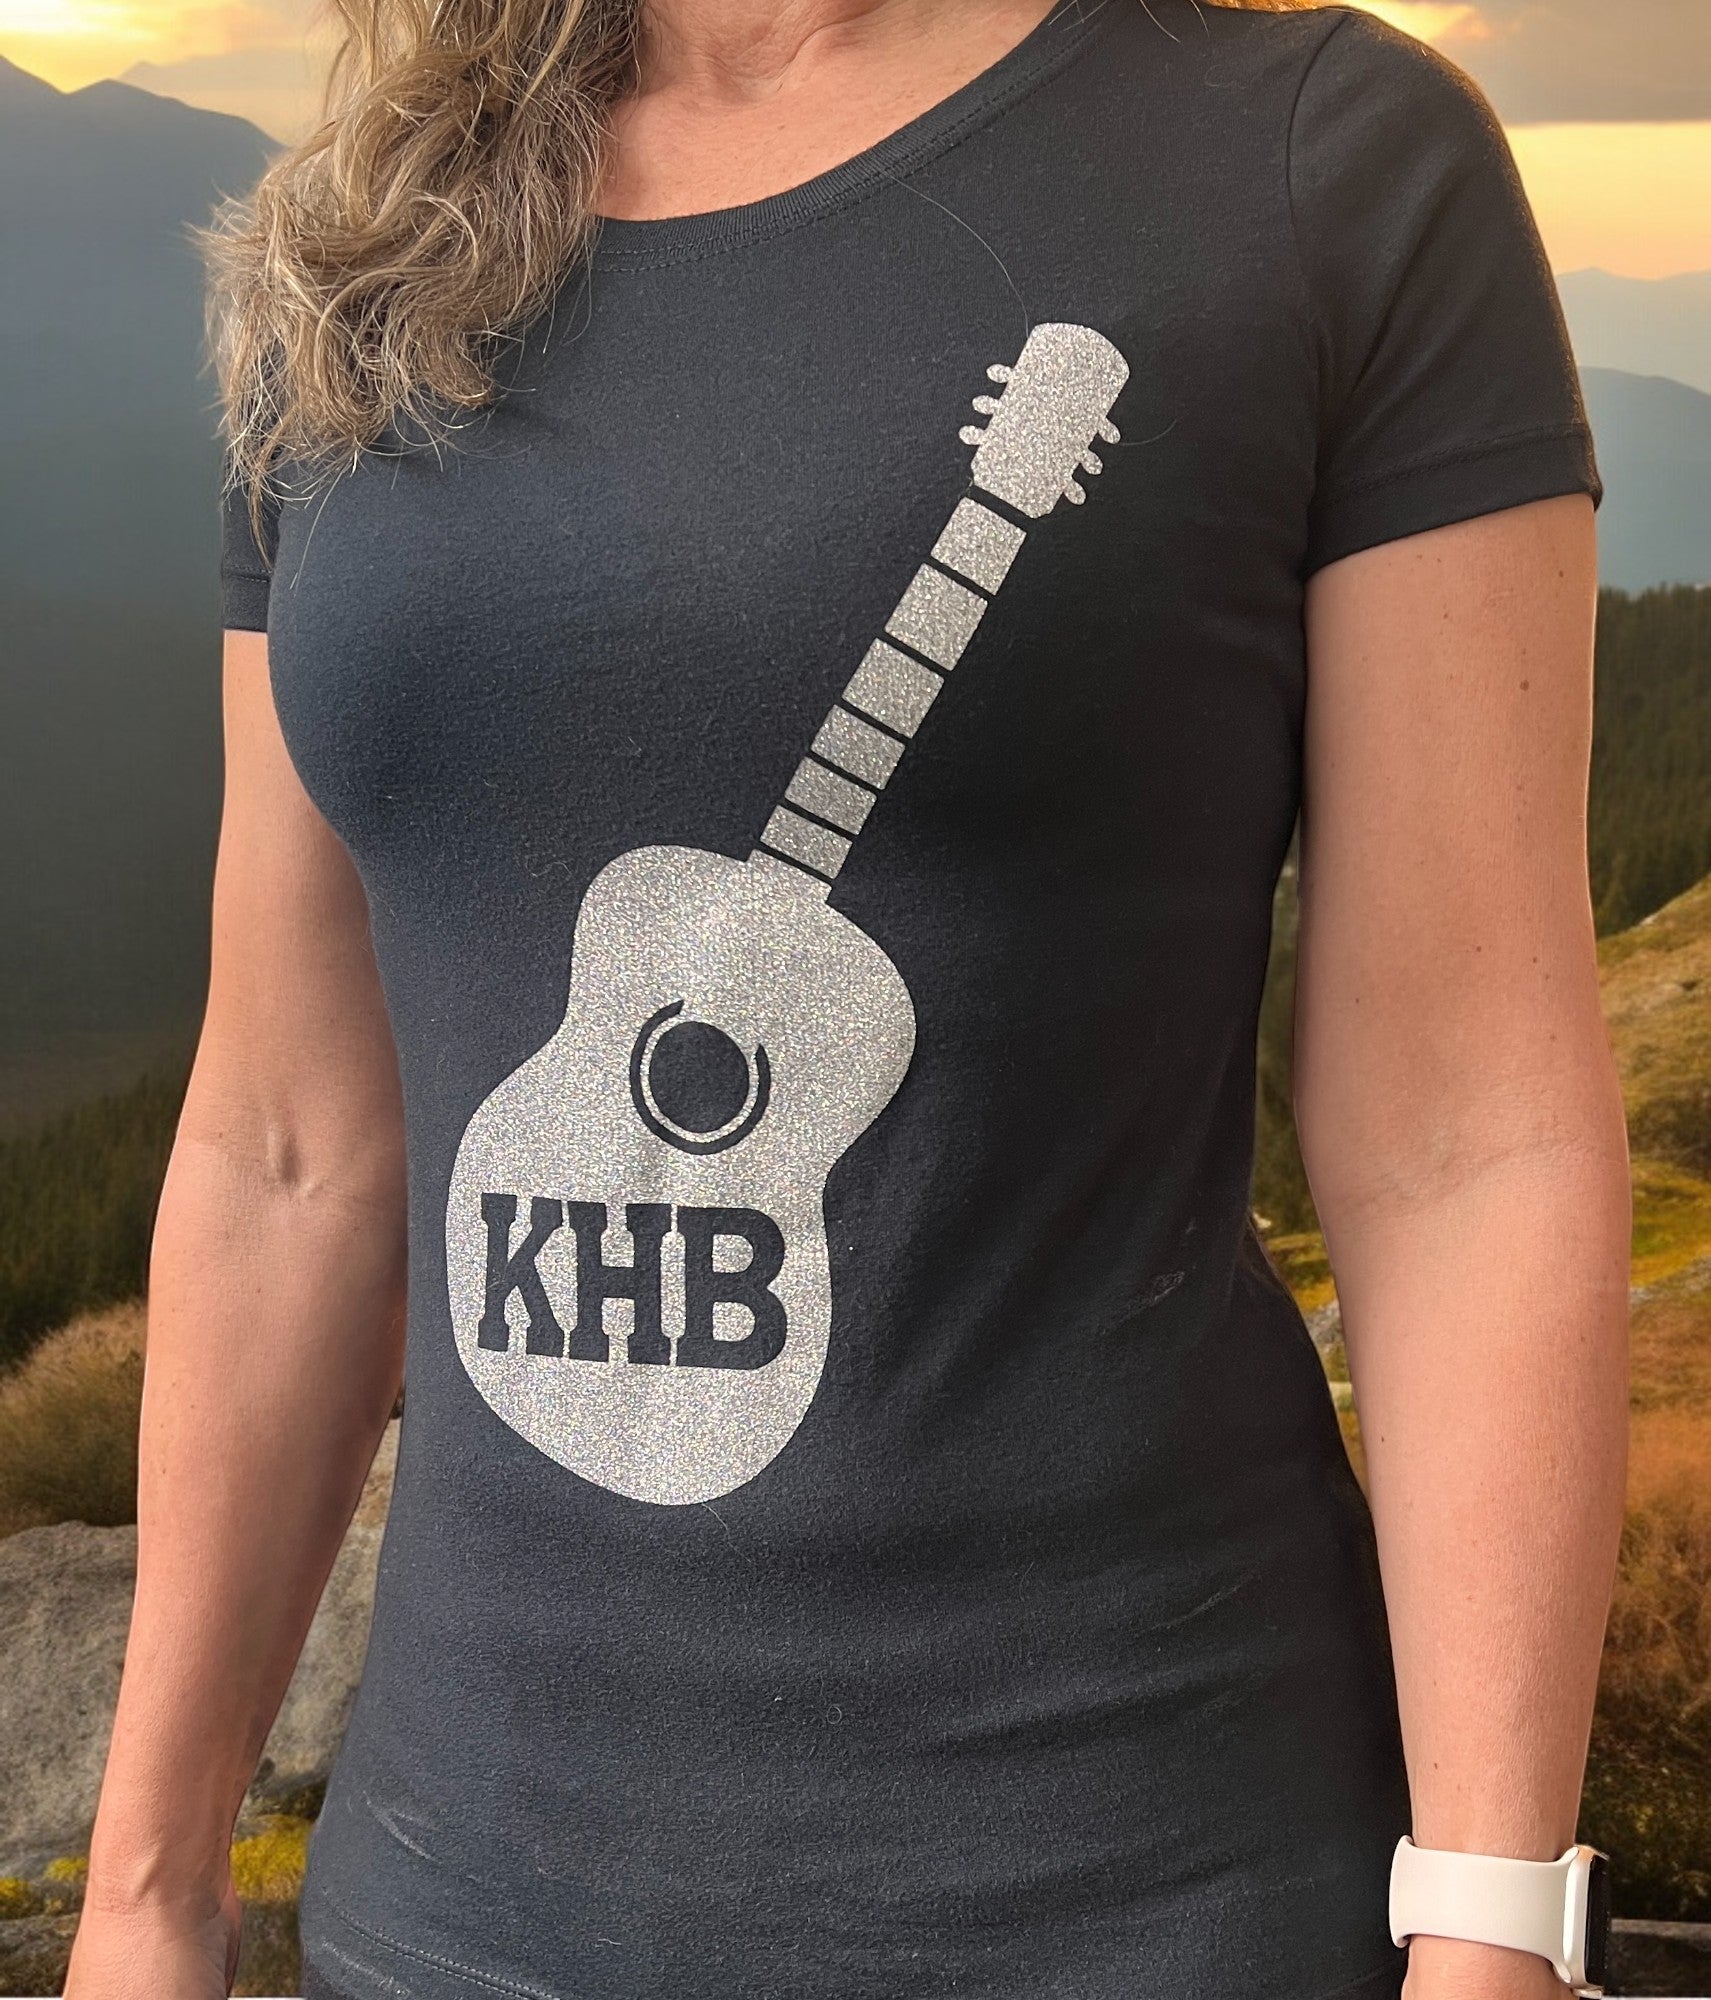 Image of the Kelly Hughes Band Sparkle Tee, featuring a glittery "Sparkle" slogan print, perfect for adding some glam to your outfit and standing out in style.